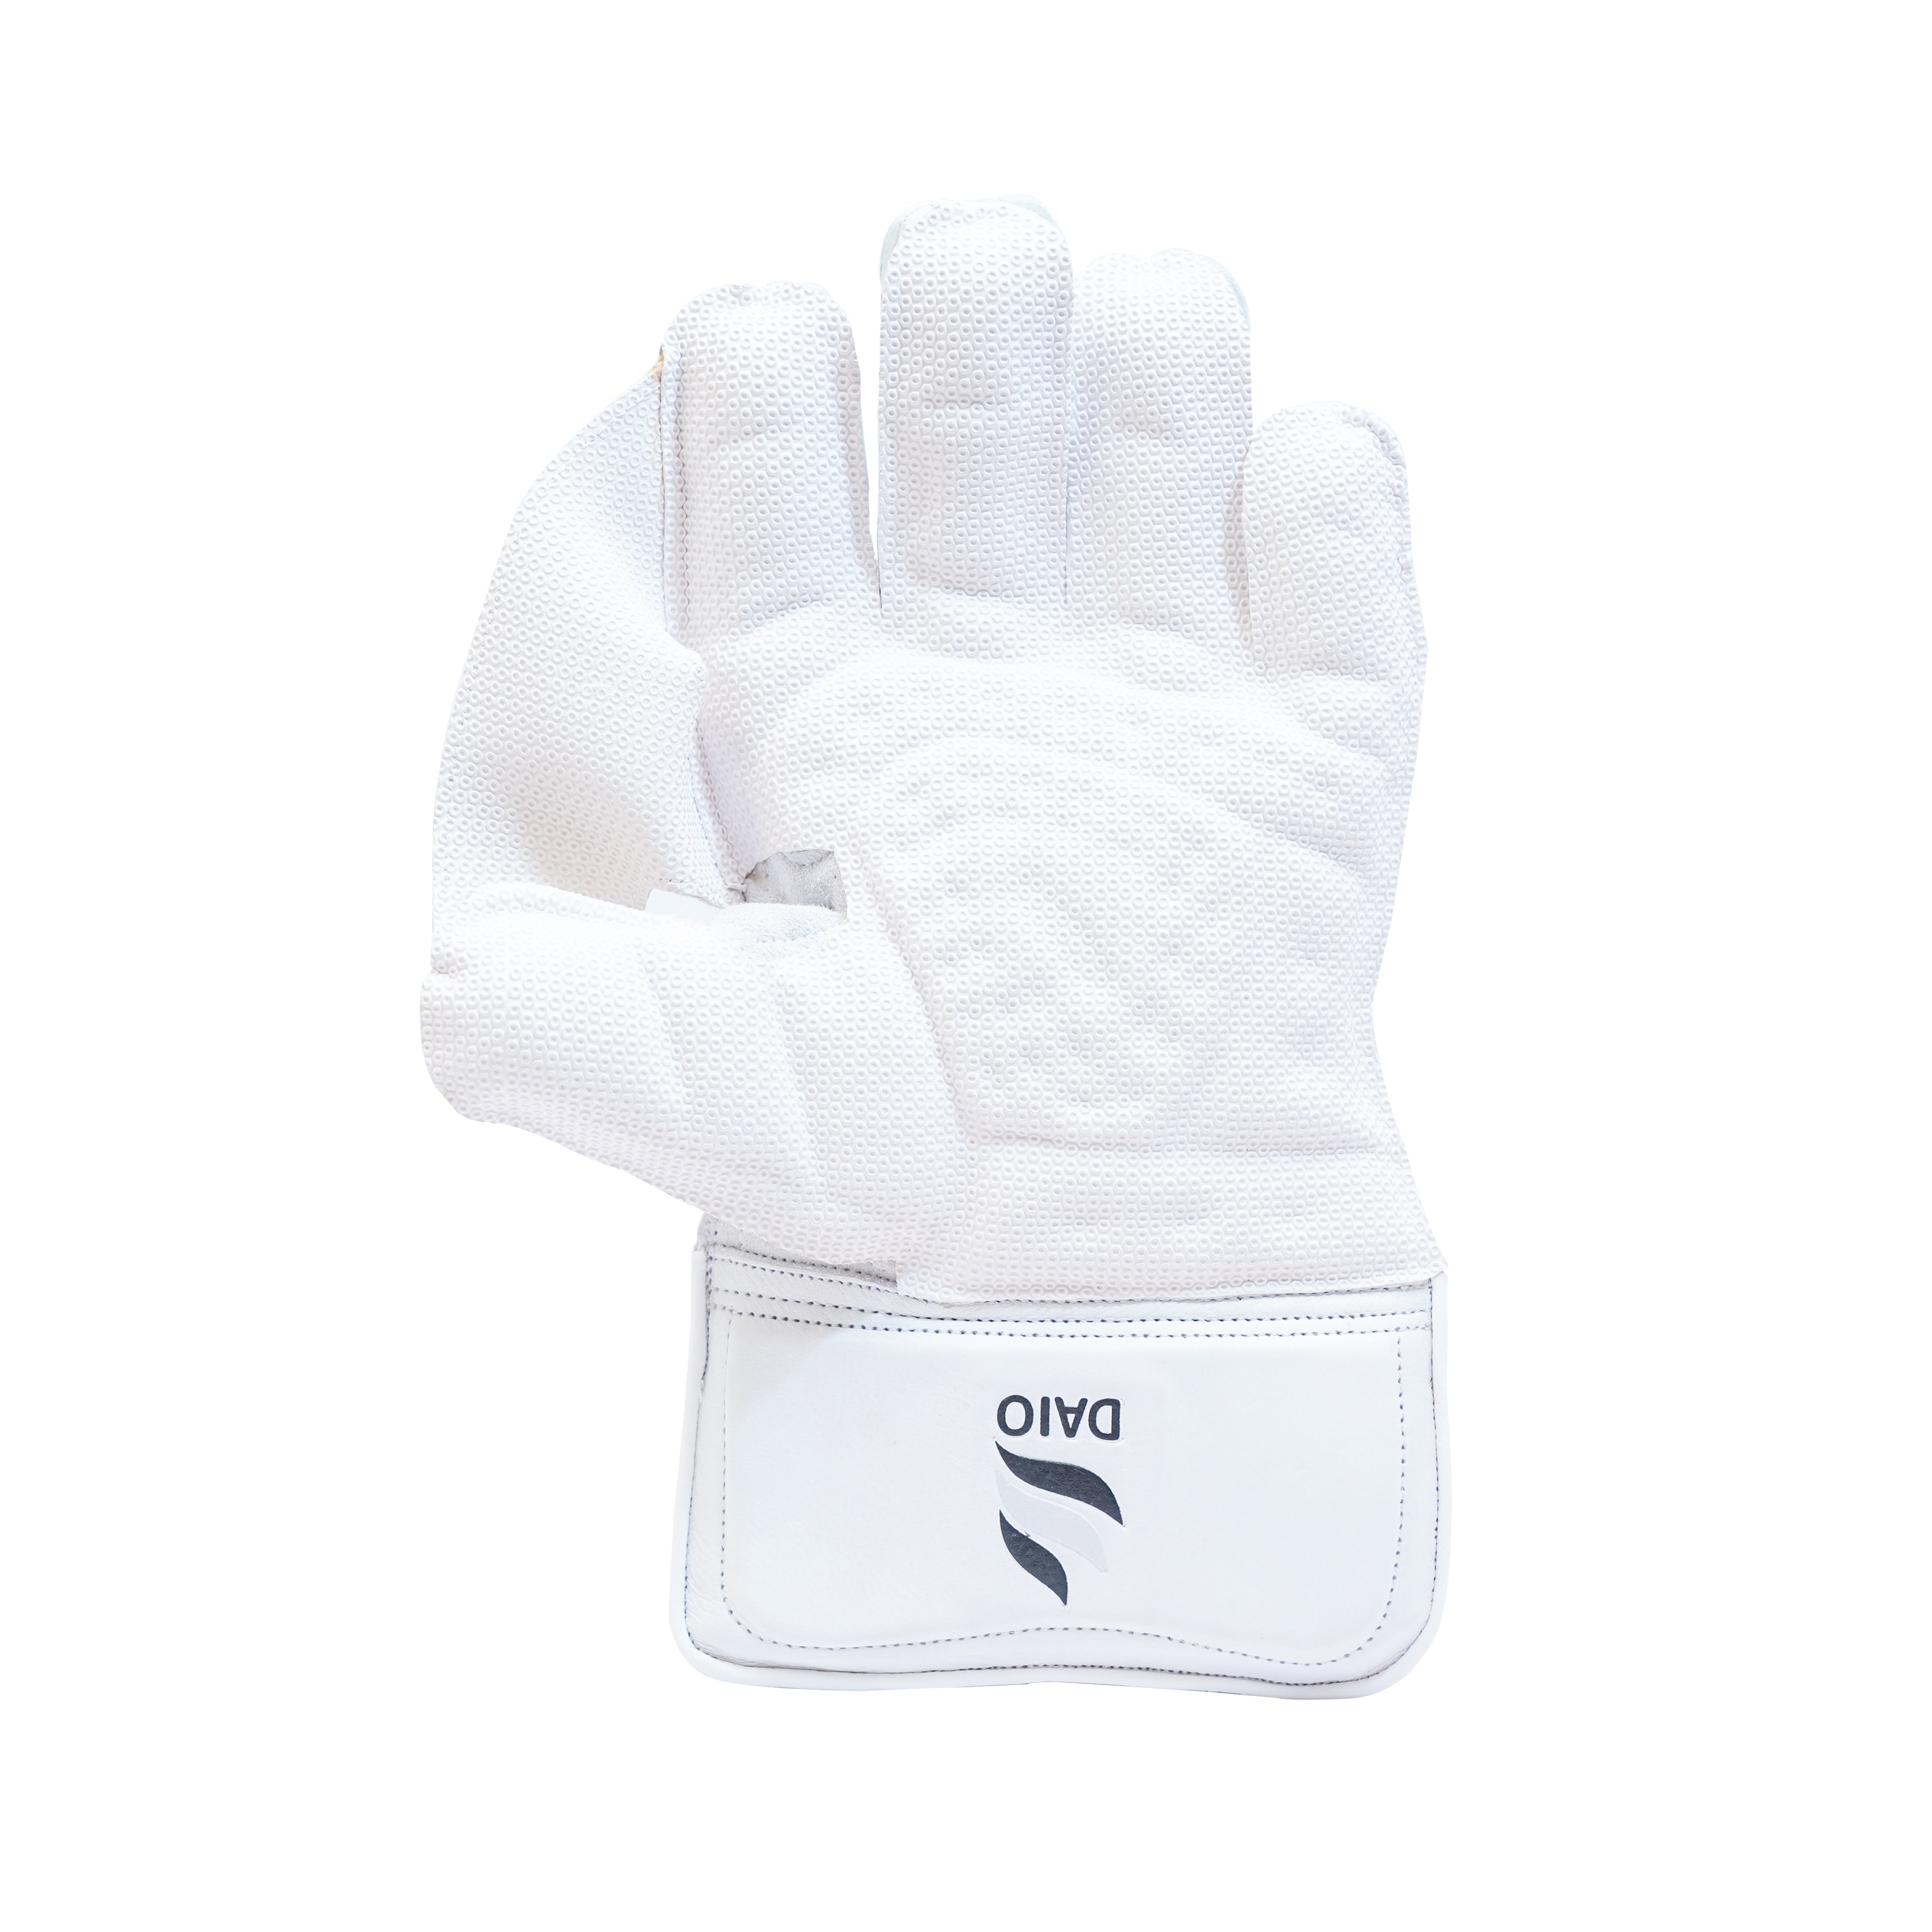 Daio players edition wicket keeping gloves